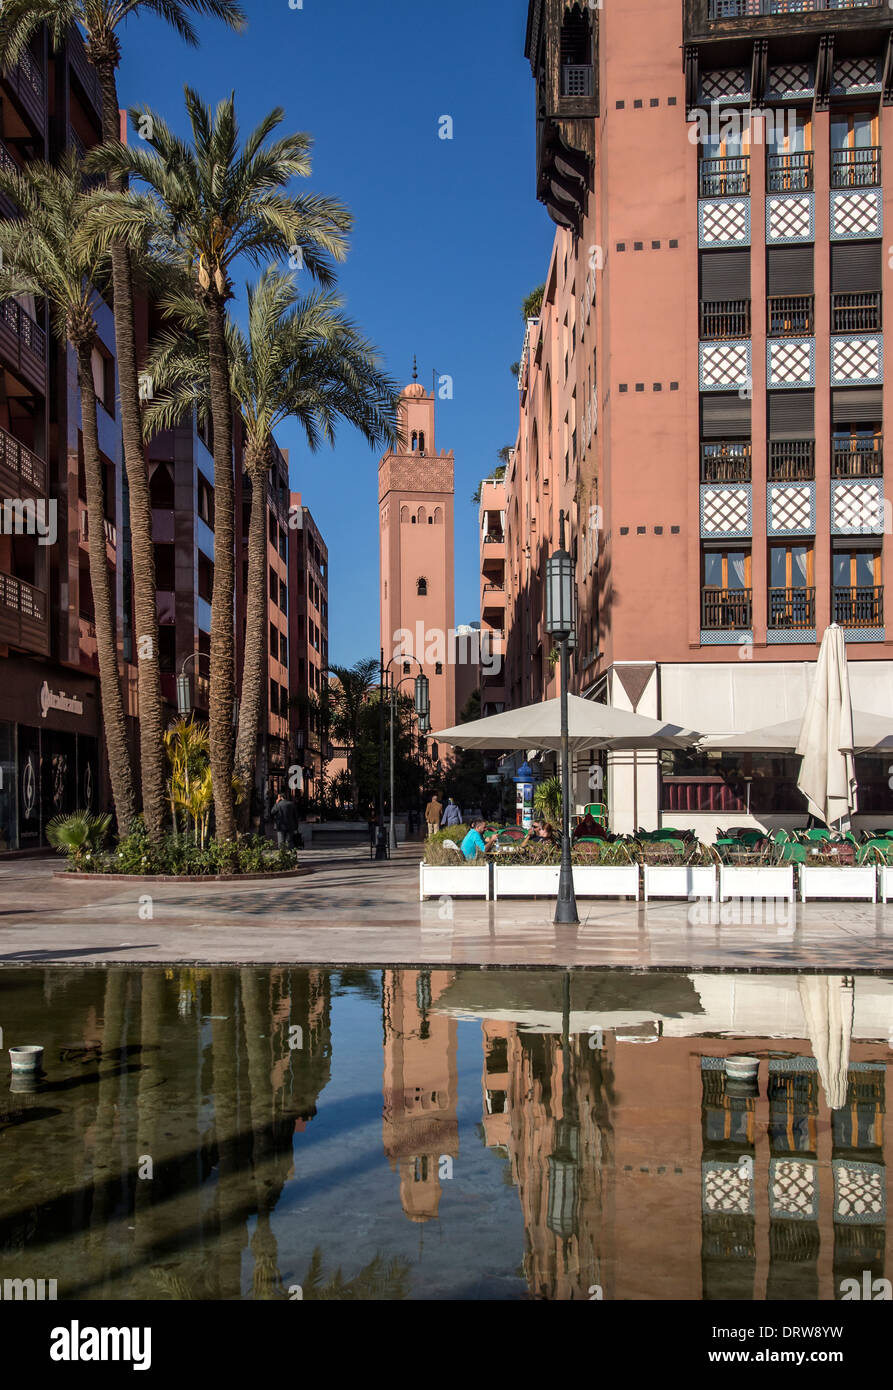 MARRAKECH, MOROCCO - JANUARY 21, 2014: Western style offices and Mosque in Plaza at Place du 16 Novembre, Gueliz, Ville Nouvelle Stock Photo